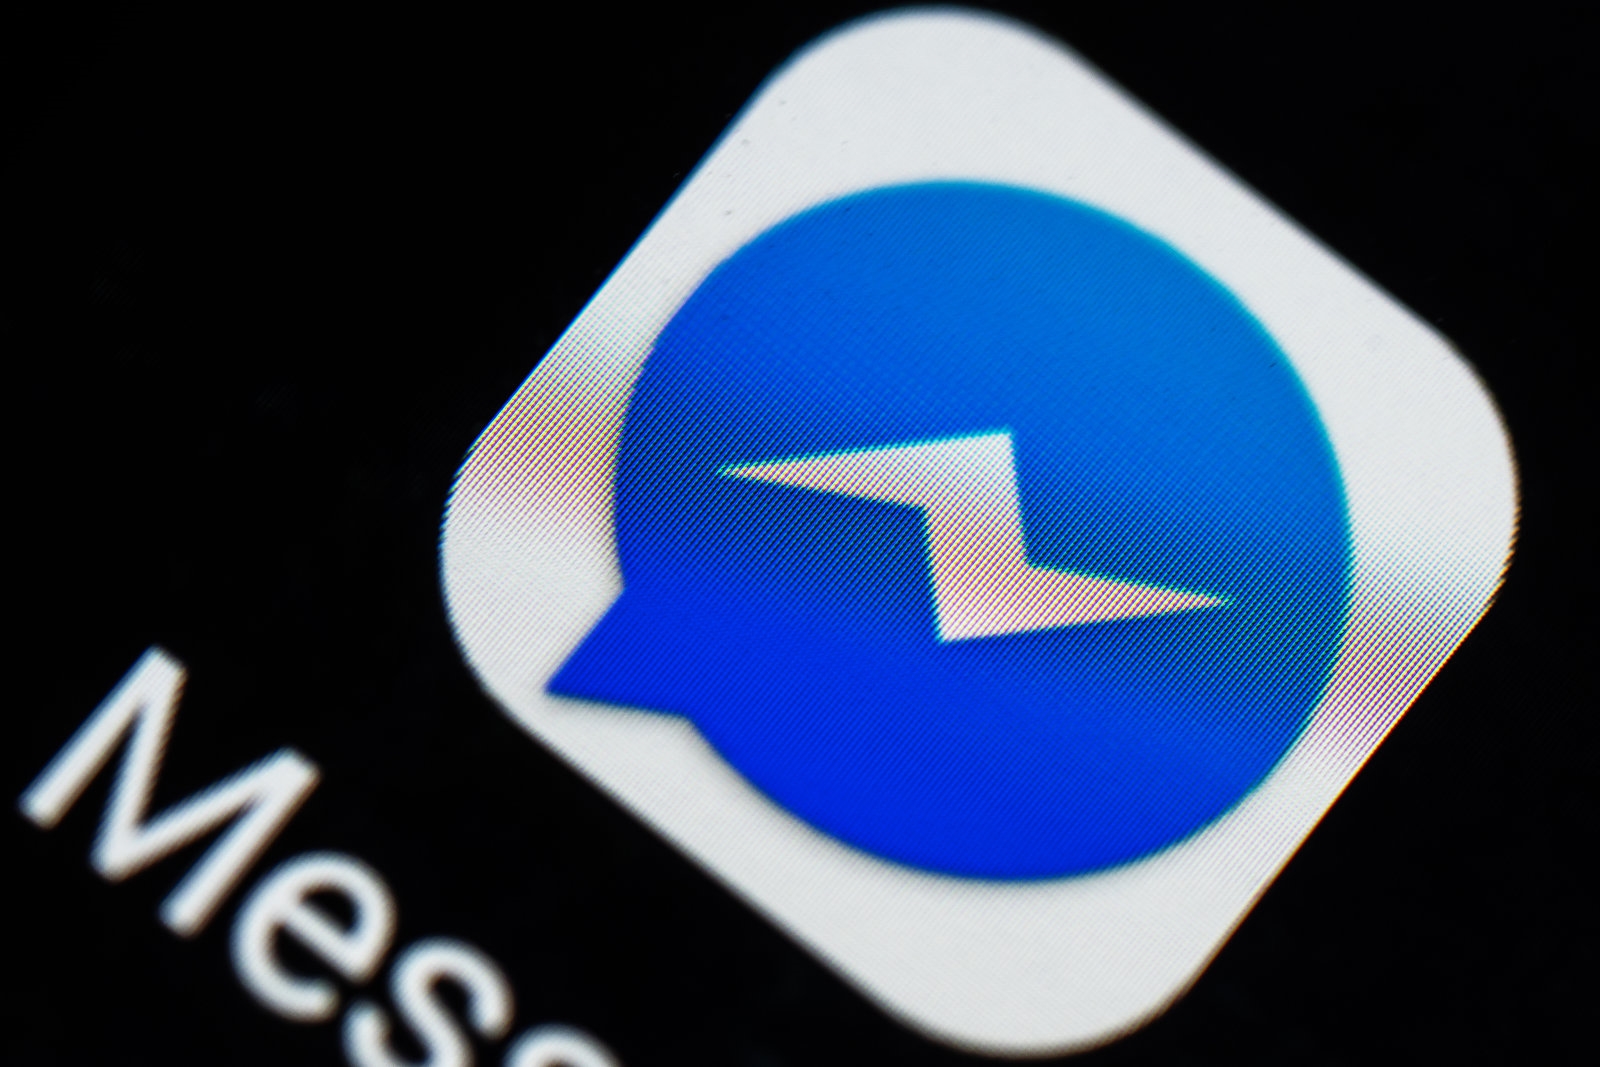 Facebook removes Discover tab in Messenger to simplify chat | DeviceDaily.com